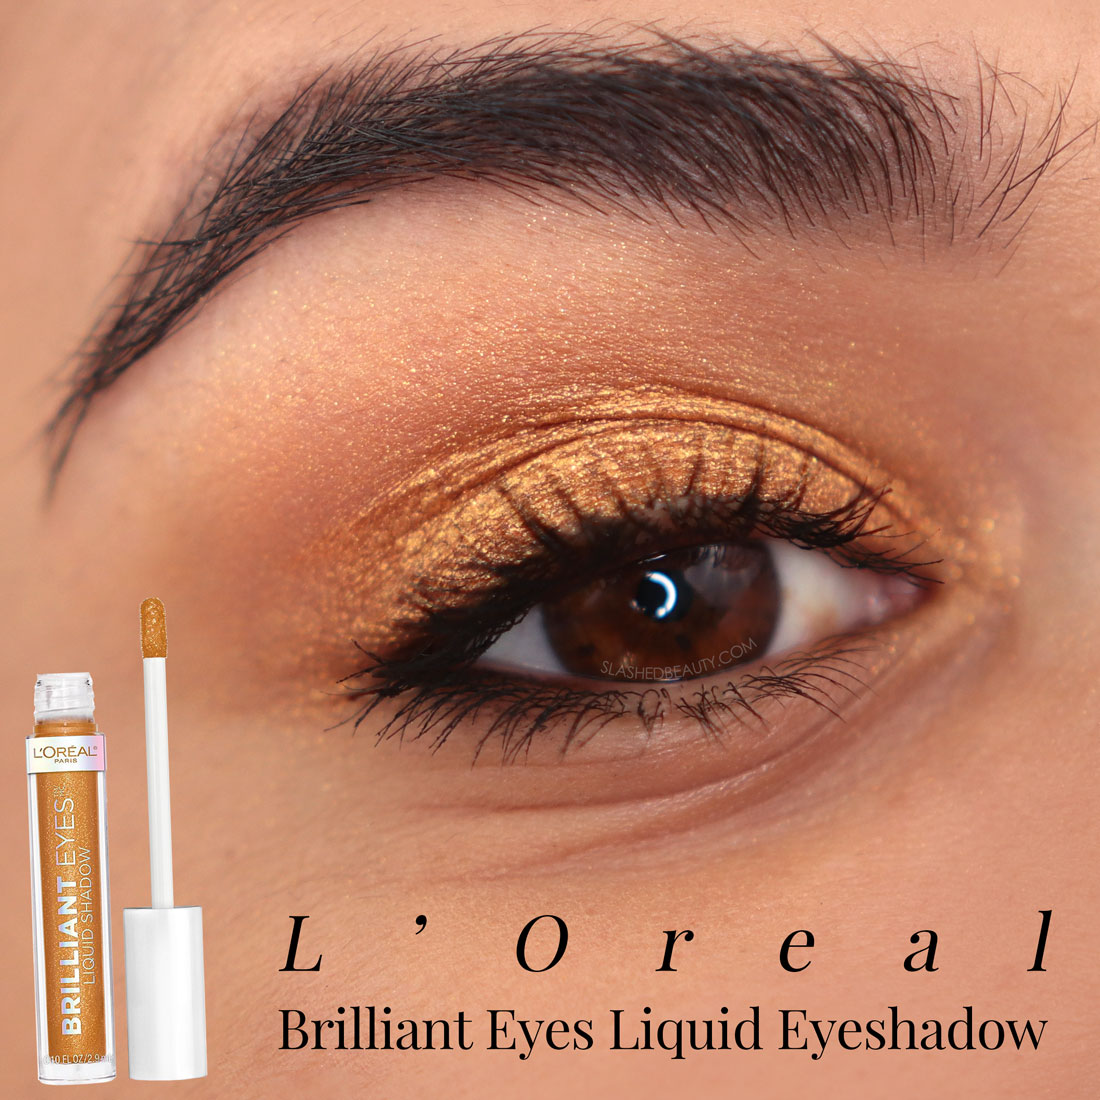 Close up of eye wearing L'Oreal Brilliant Eyes Liquid Eyeshadow in Precious Lava - metallic gold | The Best Eyeshadows for One and Done Looks | Slashed Beauty